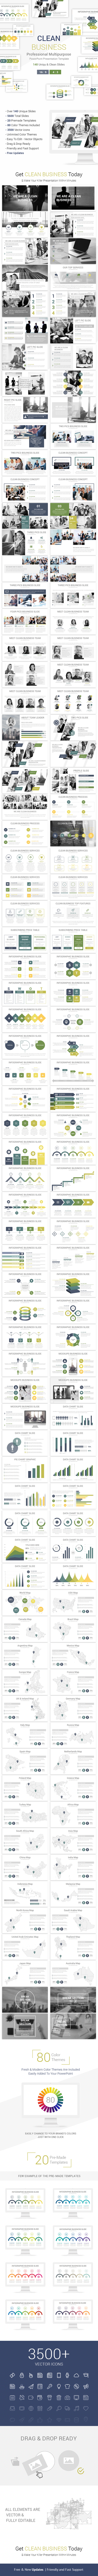 Clean Business PowerPoint Presentation Template